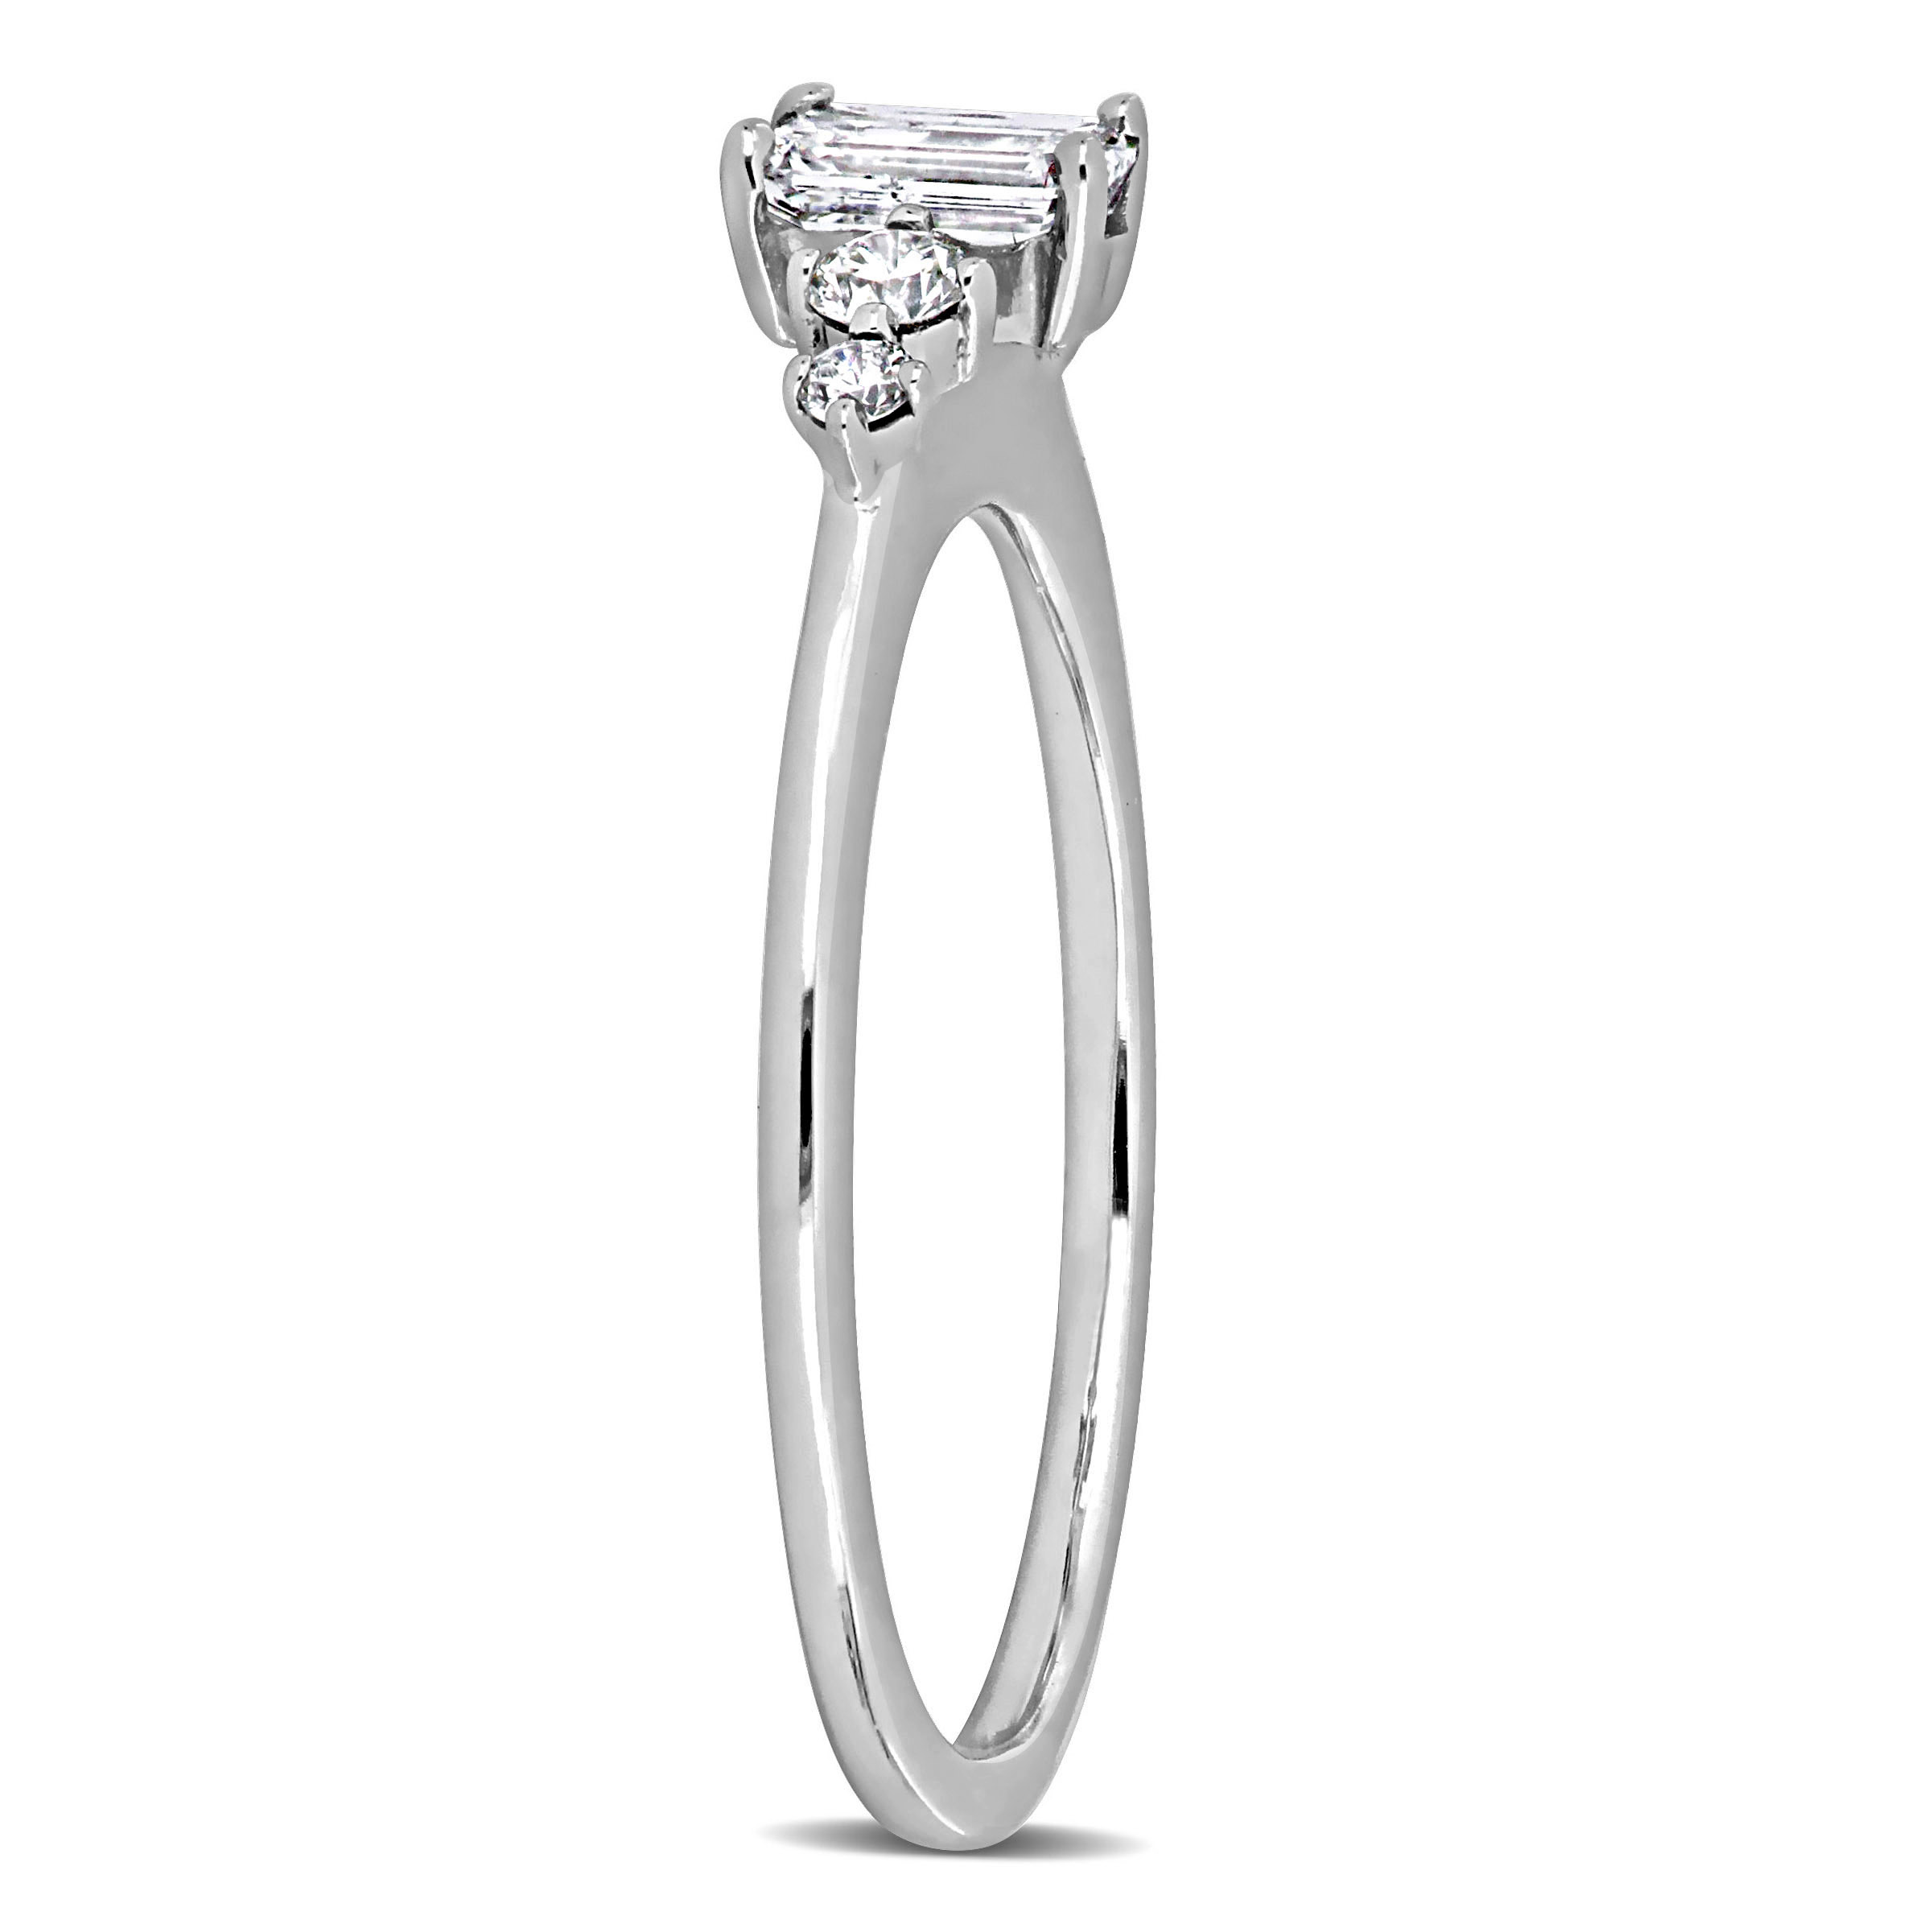 1/2 CT TW Emerald Cut and Round Diamond Engagement Ring in 14k White Gold